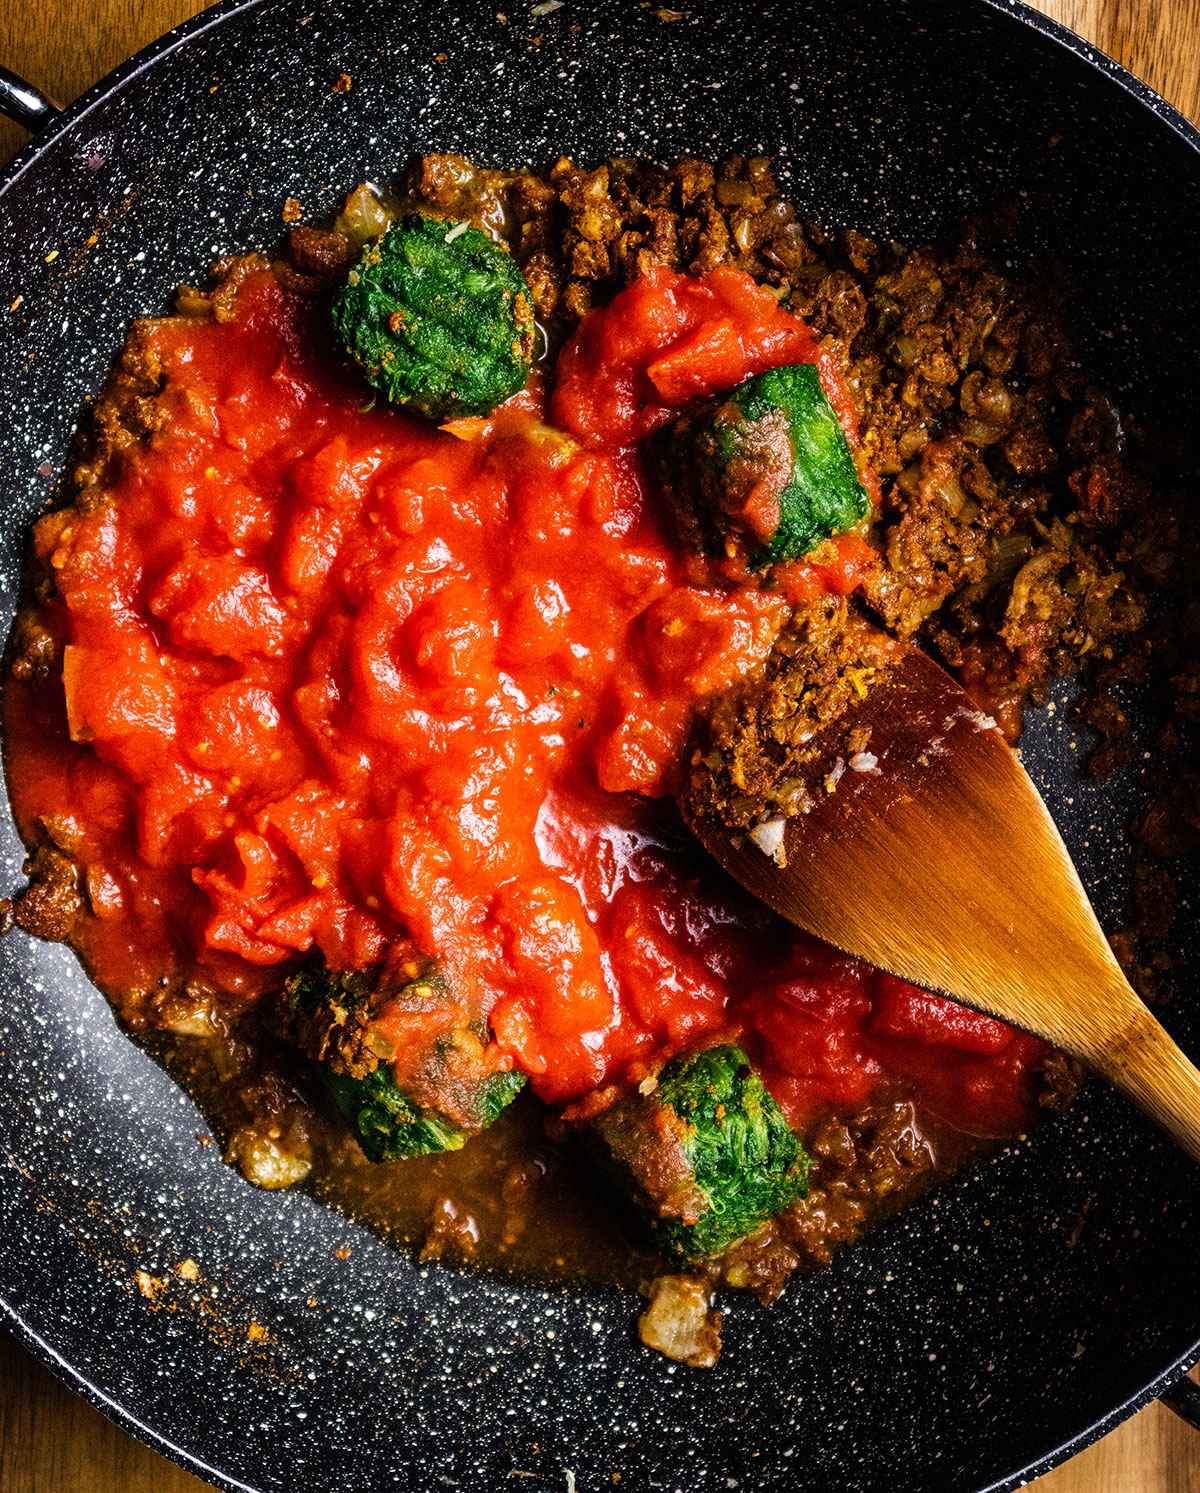 Tomatoes and spinach are added to the skillet.